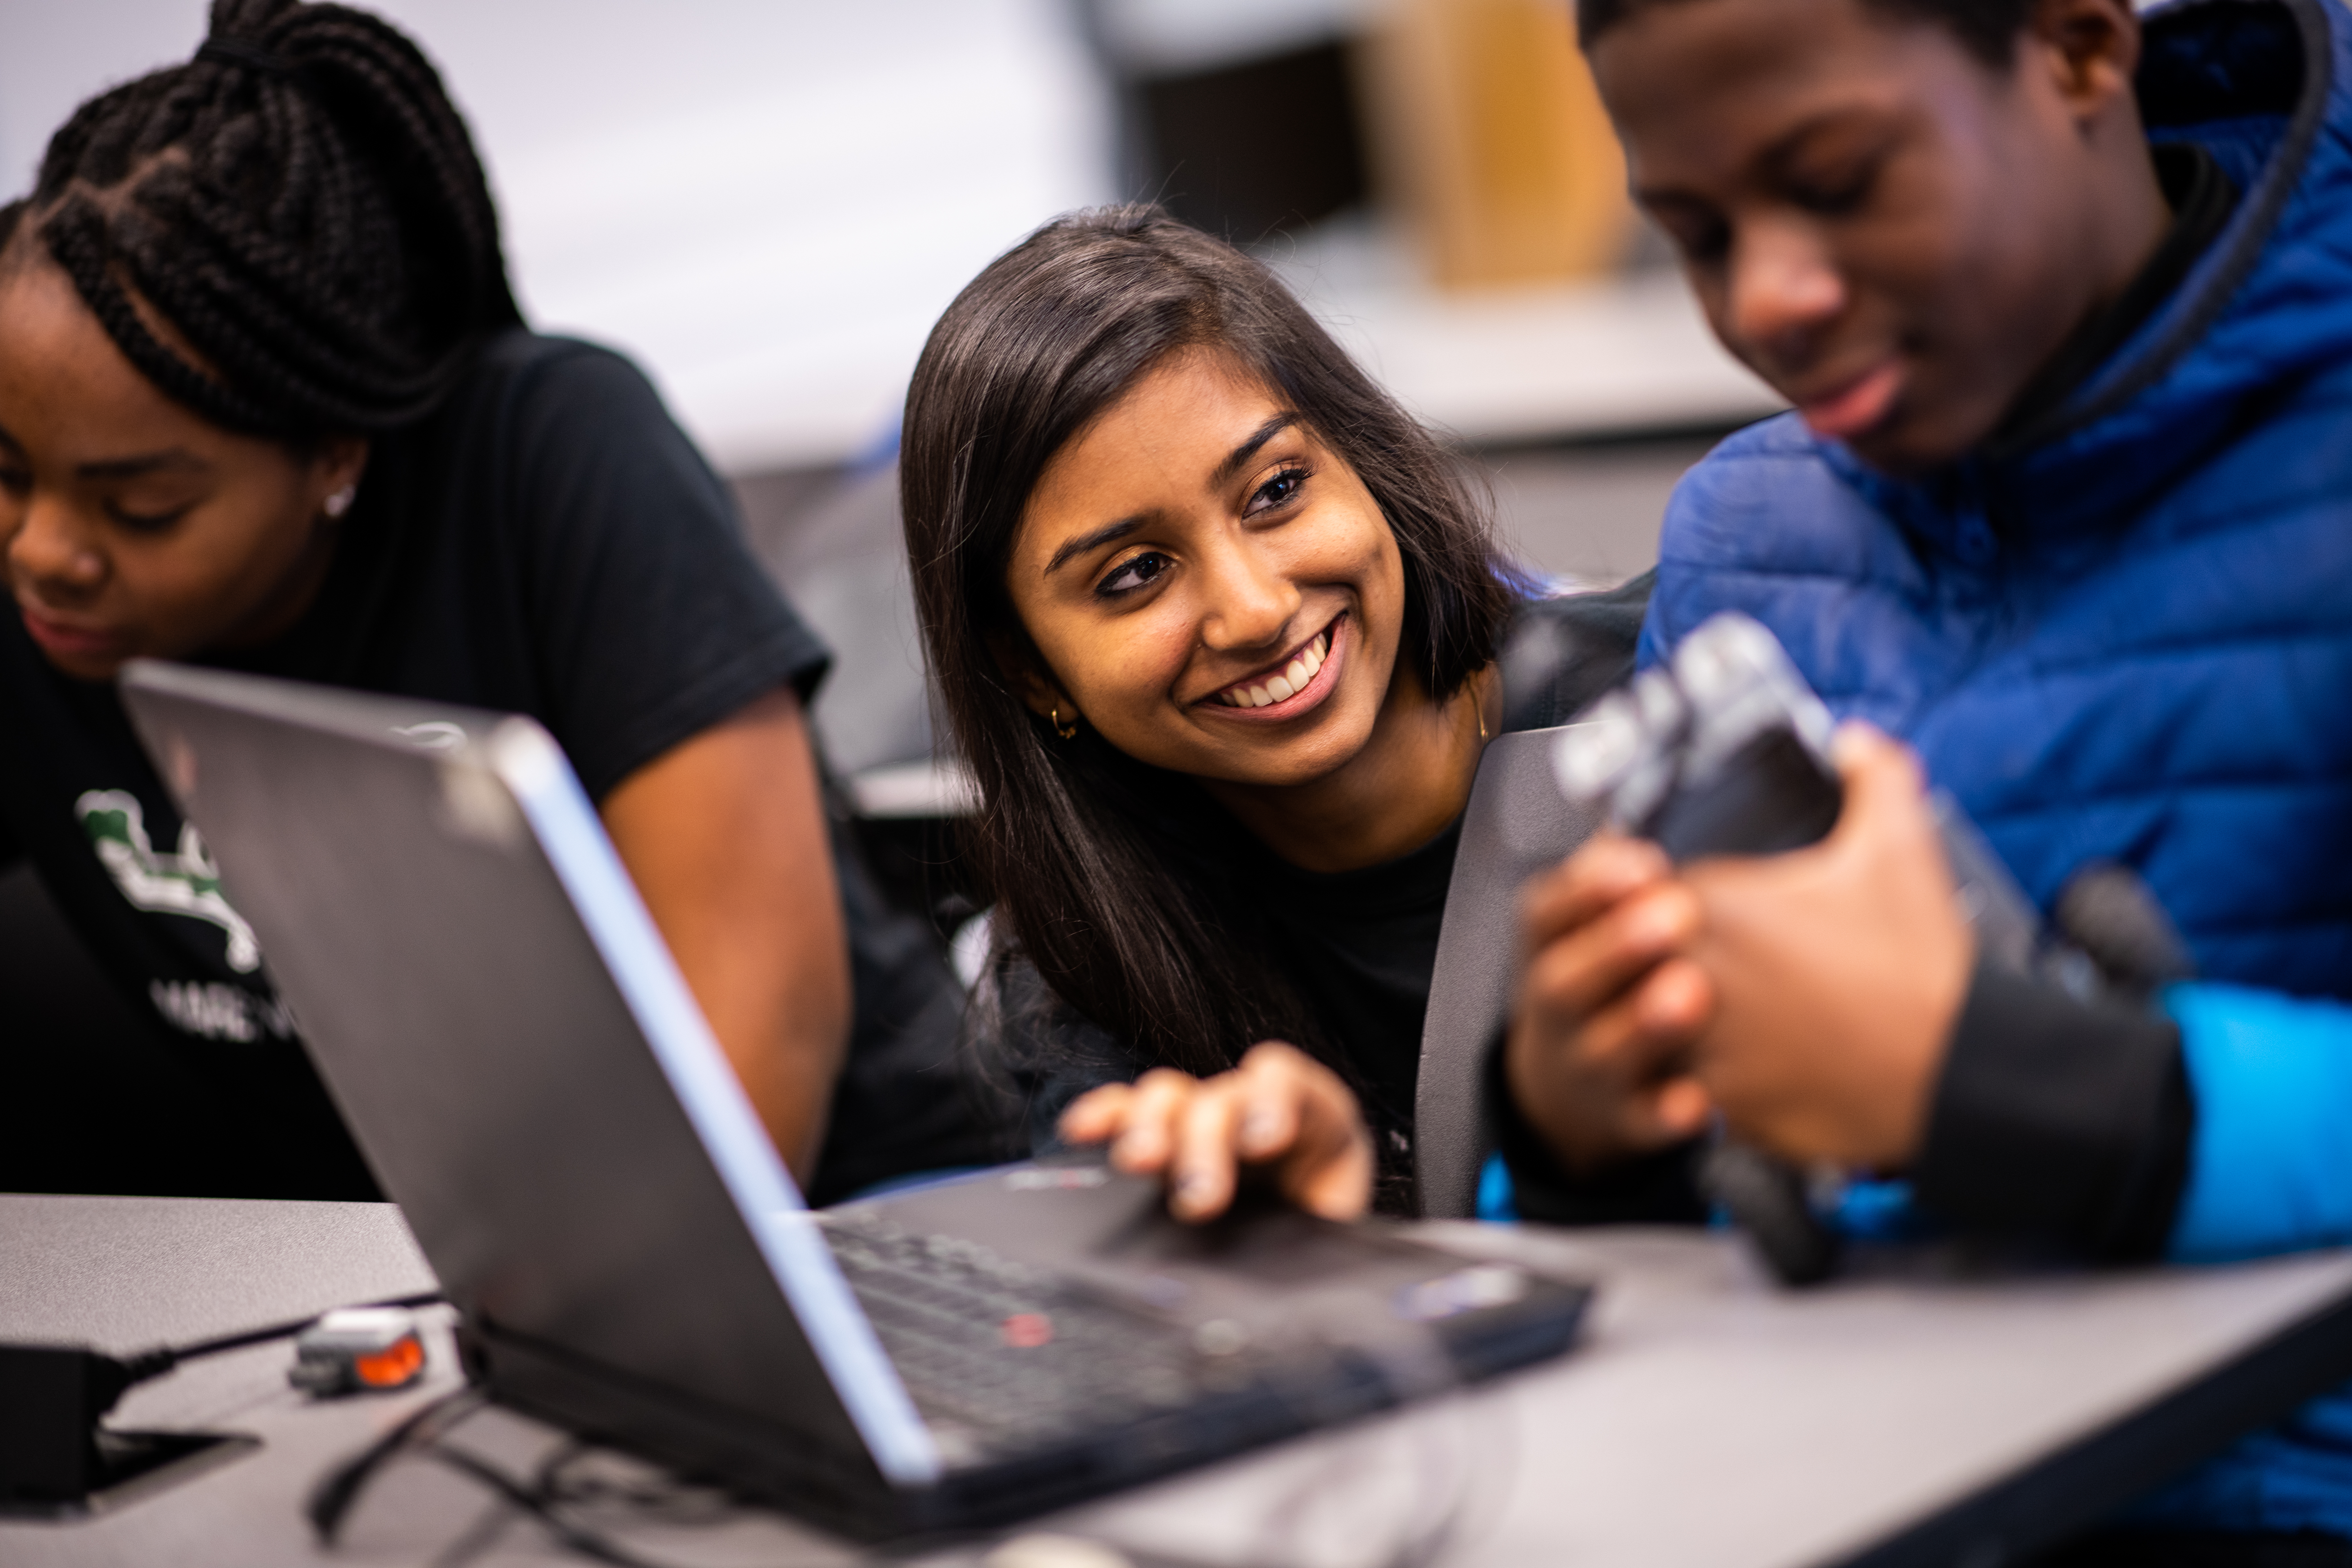 As an ambassador for Maryland Center for Women in Computing, Freshman computer science major Utsa Santhosh believes building community among underrepresented groups can help diversify the field of computer science. Image credit: Justin Derato (Click image to download hi-res version)